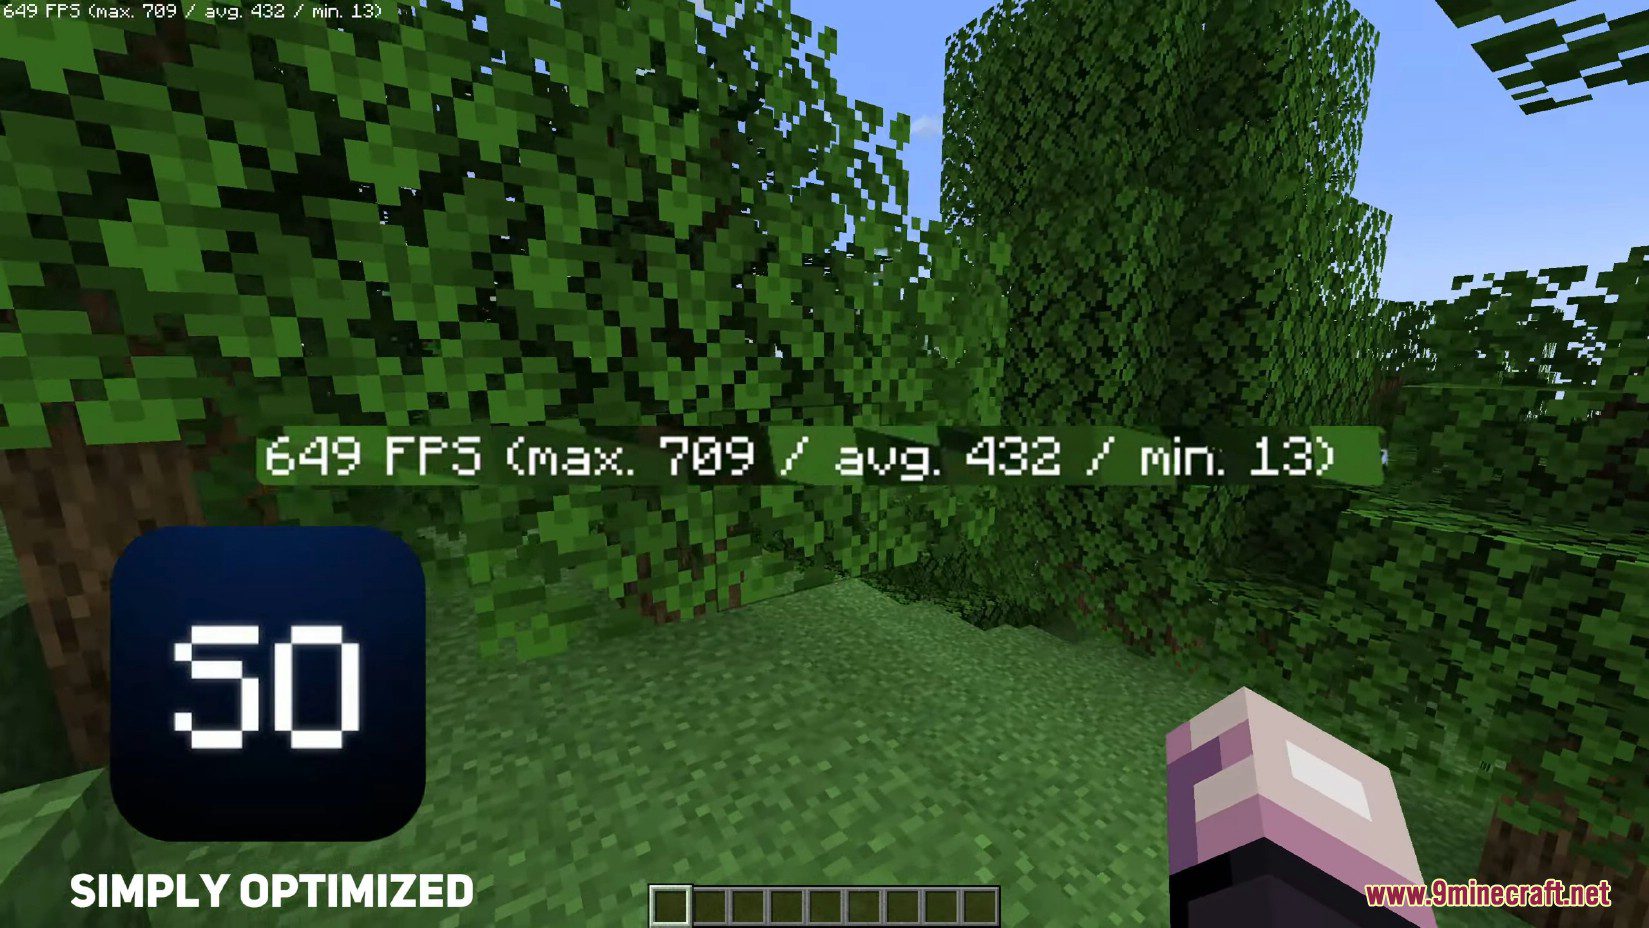 Simply Optimized Modpack (1.21, 1.20.1) - Better Than Fabulously Optimized 7